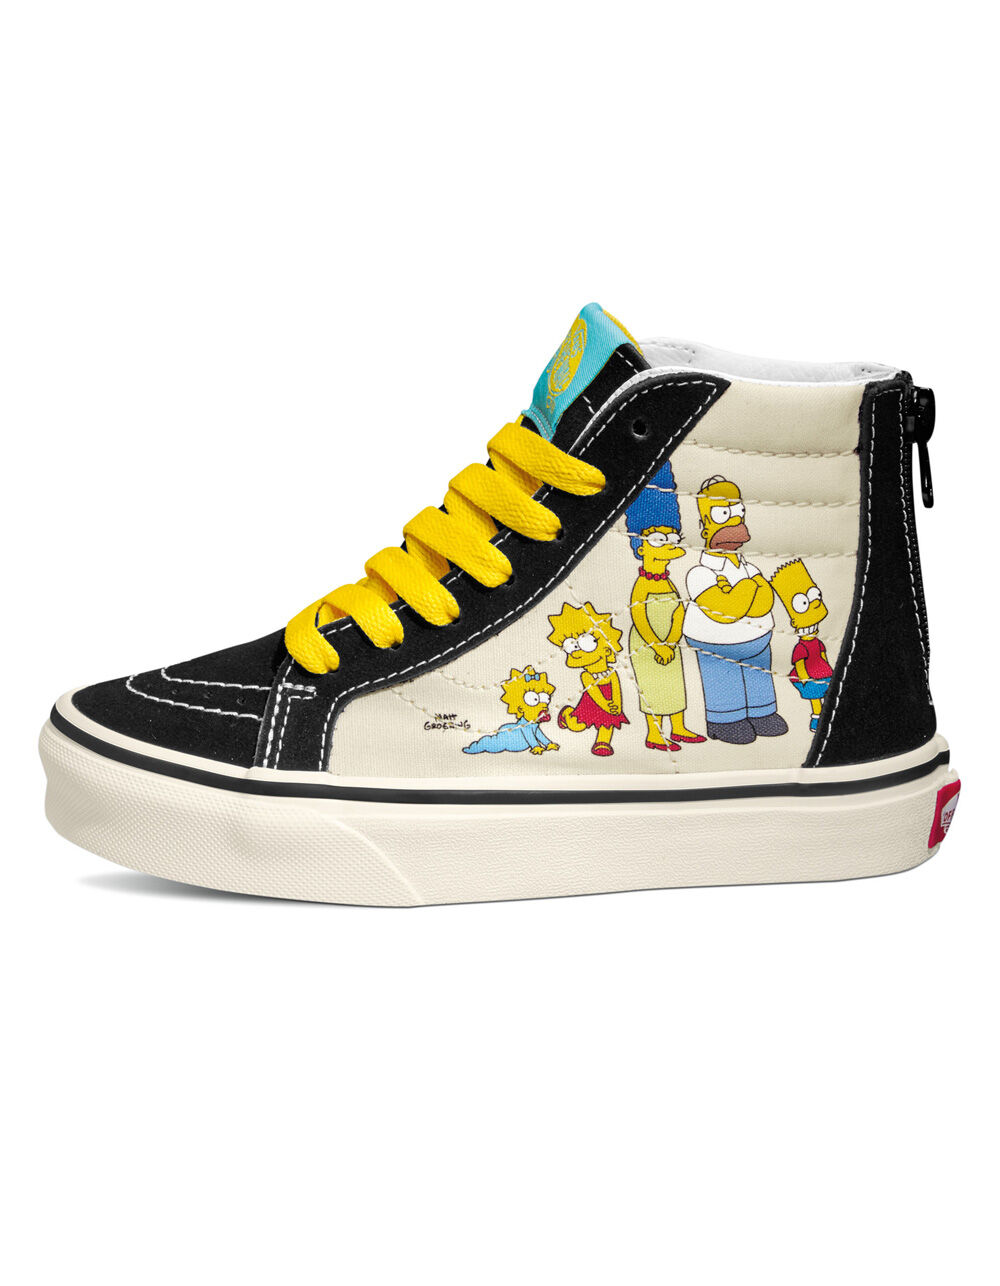 New collection The Simpson x Vans - Palm Isle Skate Shop